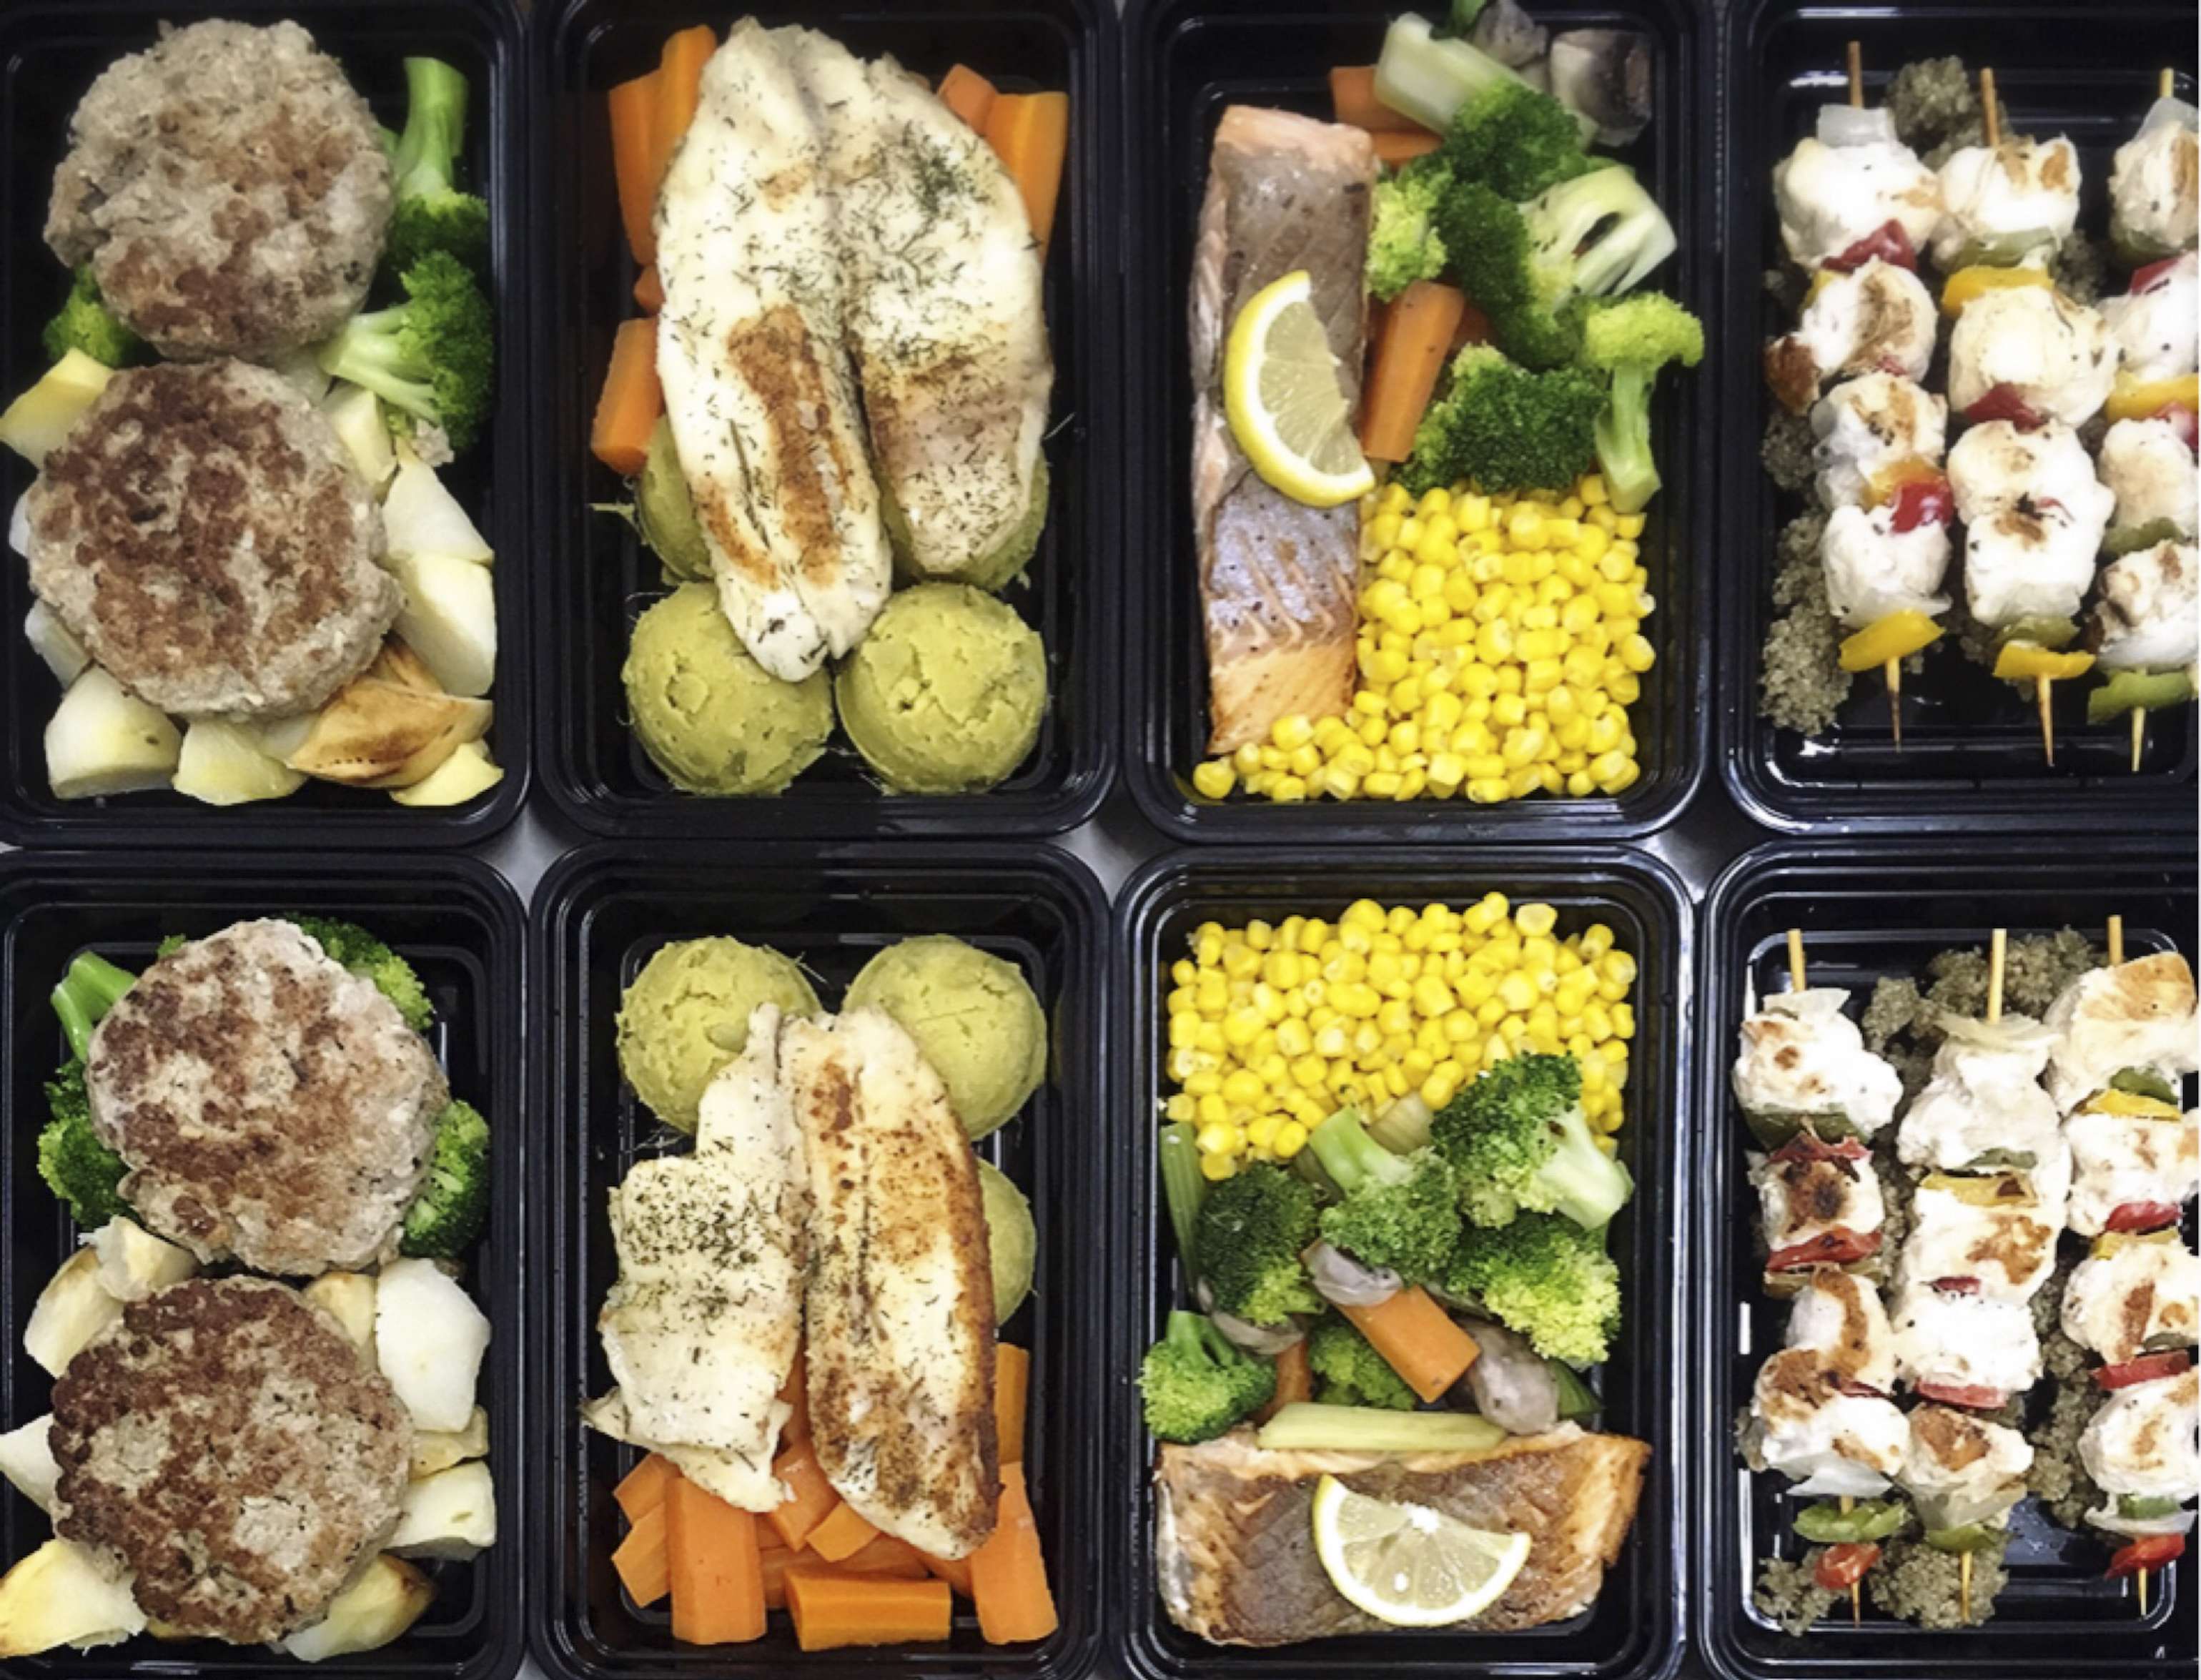 A range of healthy pre-packed meals by Mealthy including grilled beef burger patty, steamed broccoli and baked potato; Pan-fried tilapia fillets, steamed carrot and sweet potato mash; and chicken and capsicum skewers with quinoa. Photo: courtesy of Mealthy